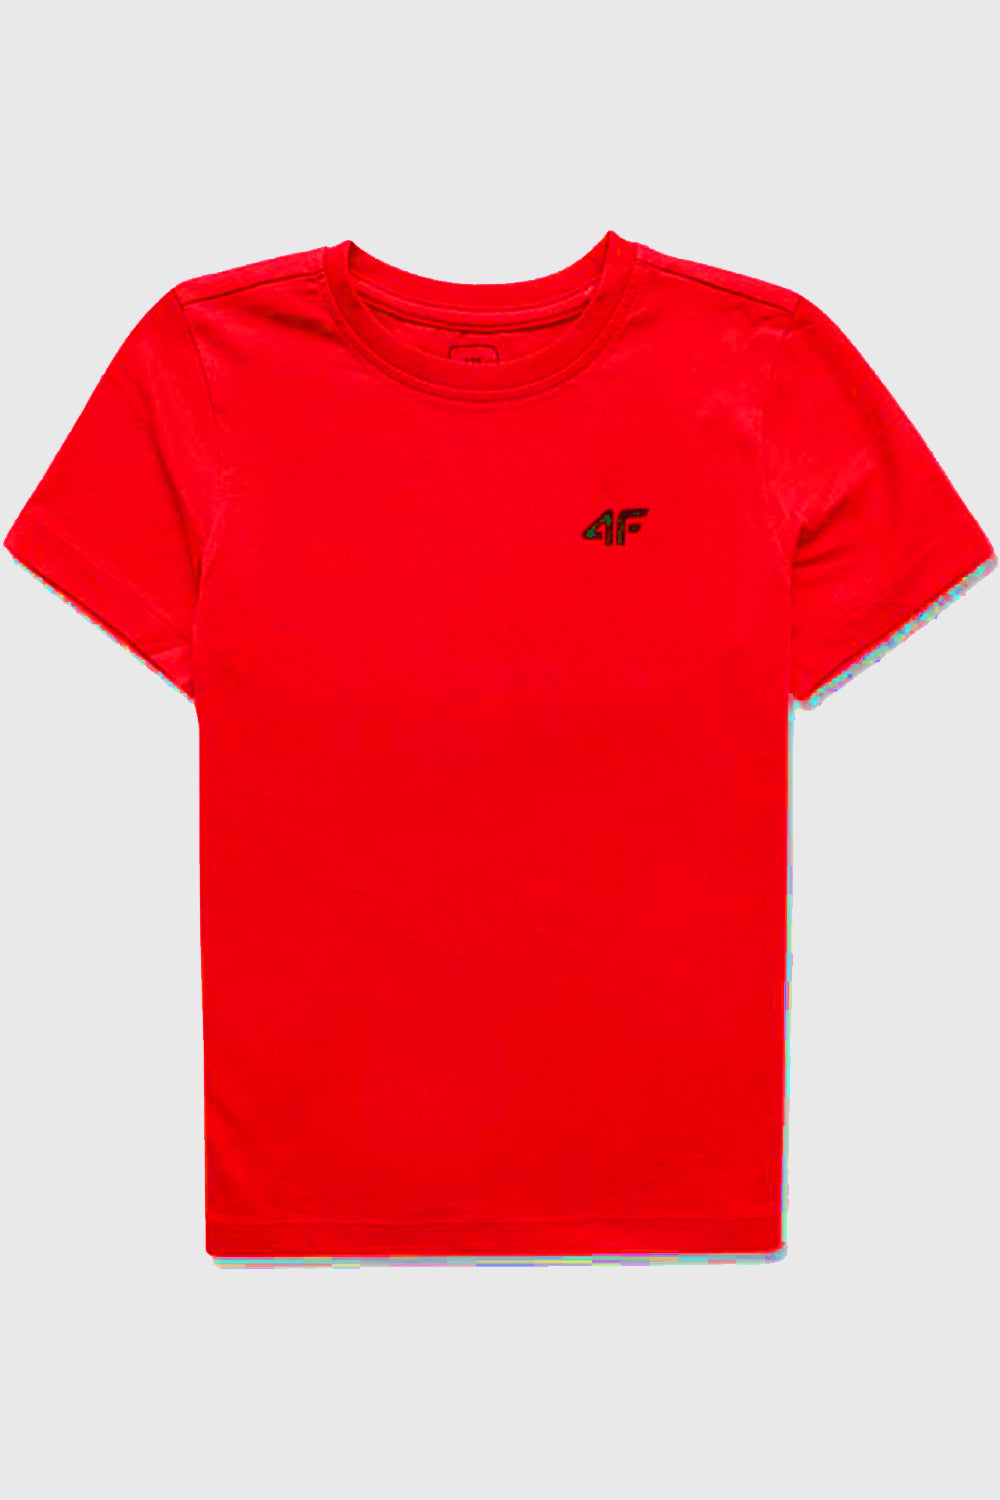 Classic Red Boys T-Shirt with Subtle 4F Branding